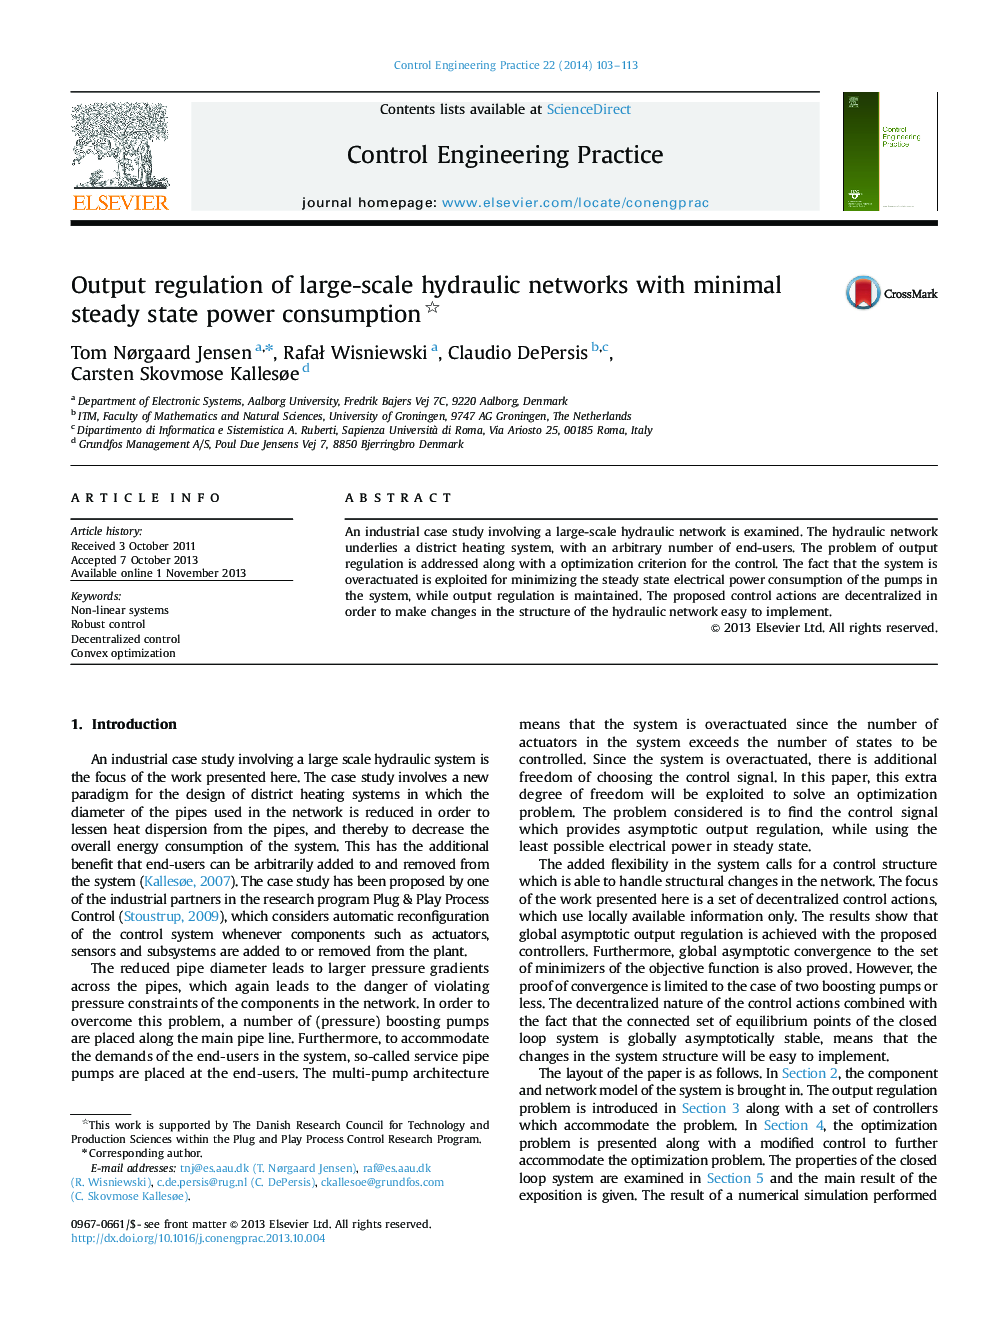 Output regulation of large-scale hydraulic networks with minimal steady state power consumption 